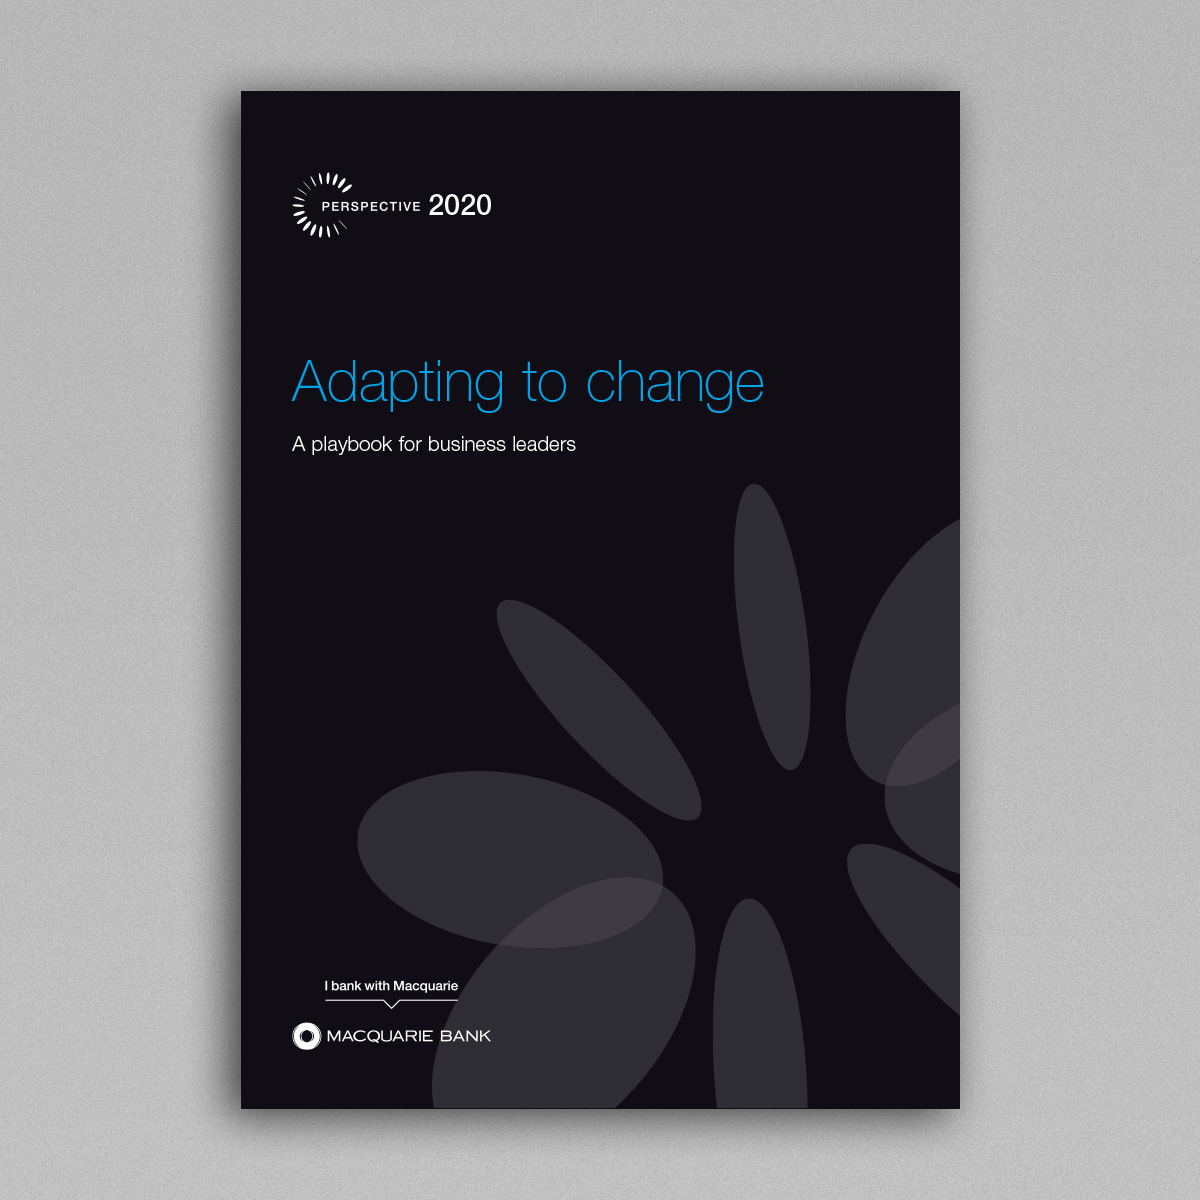 Image of front cover of Perspective 2020 report on a grey background